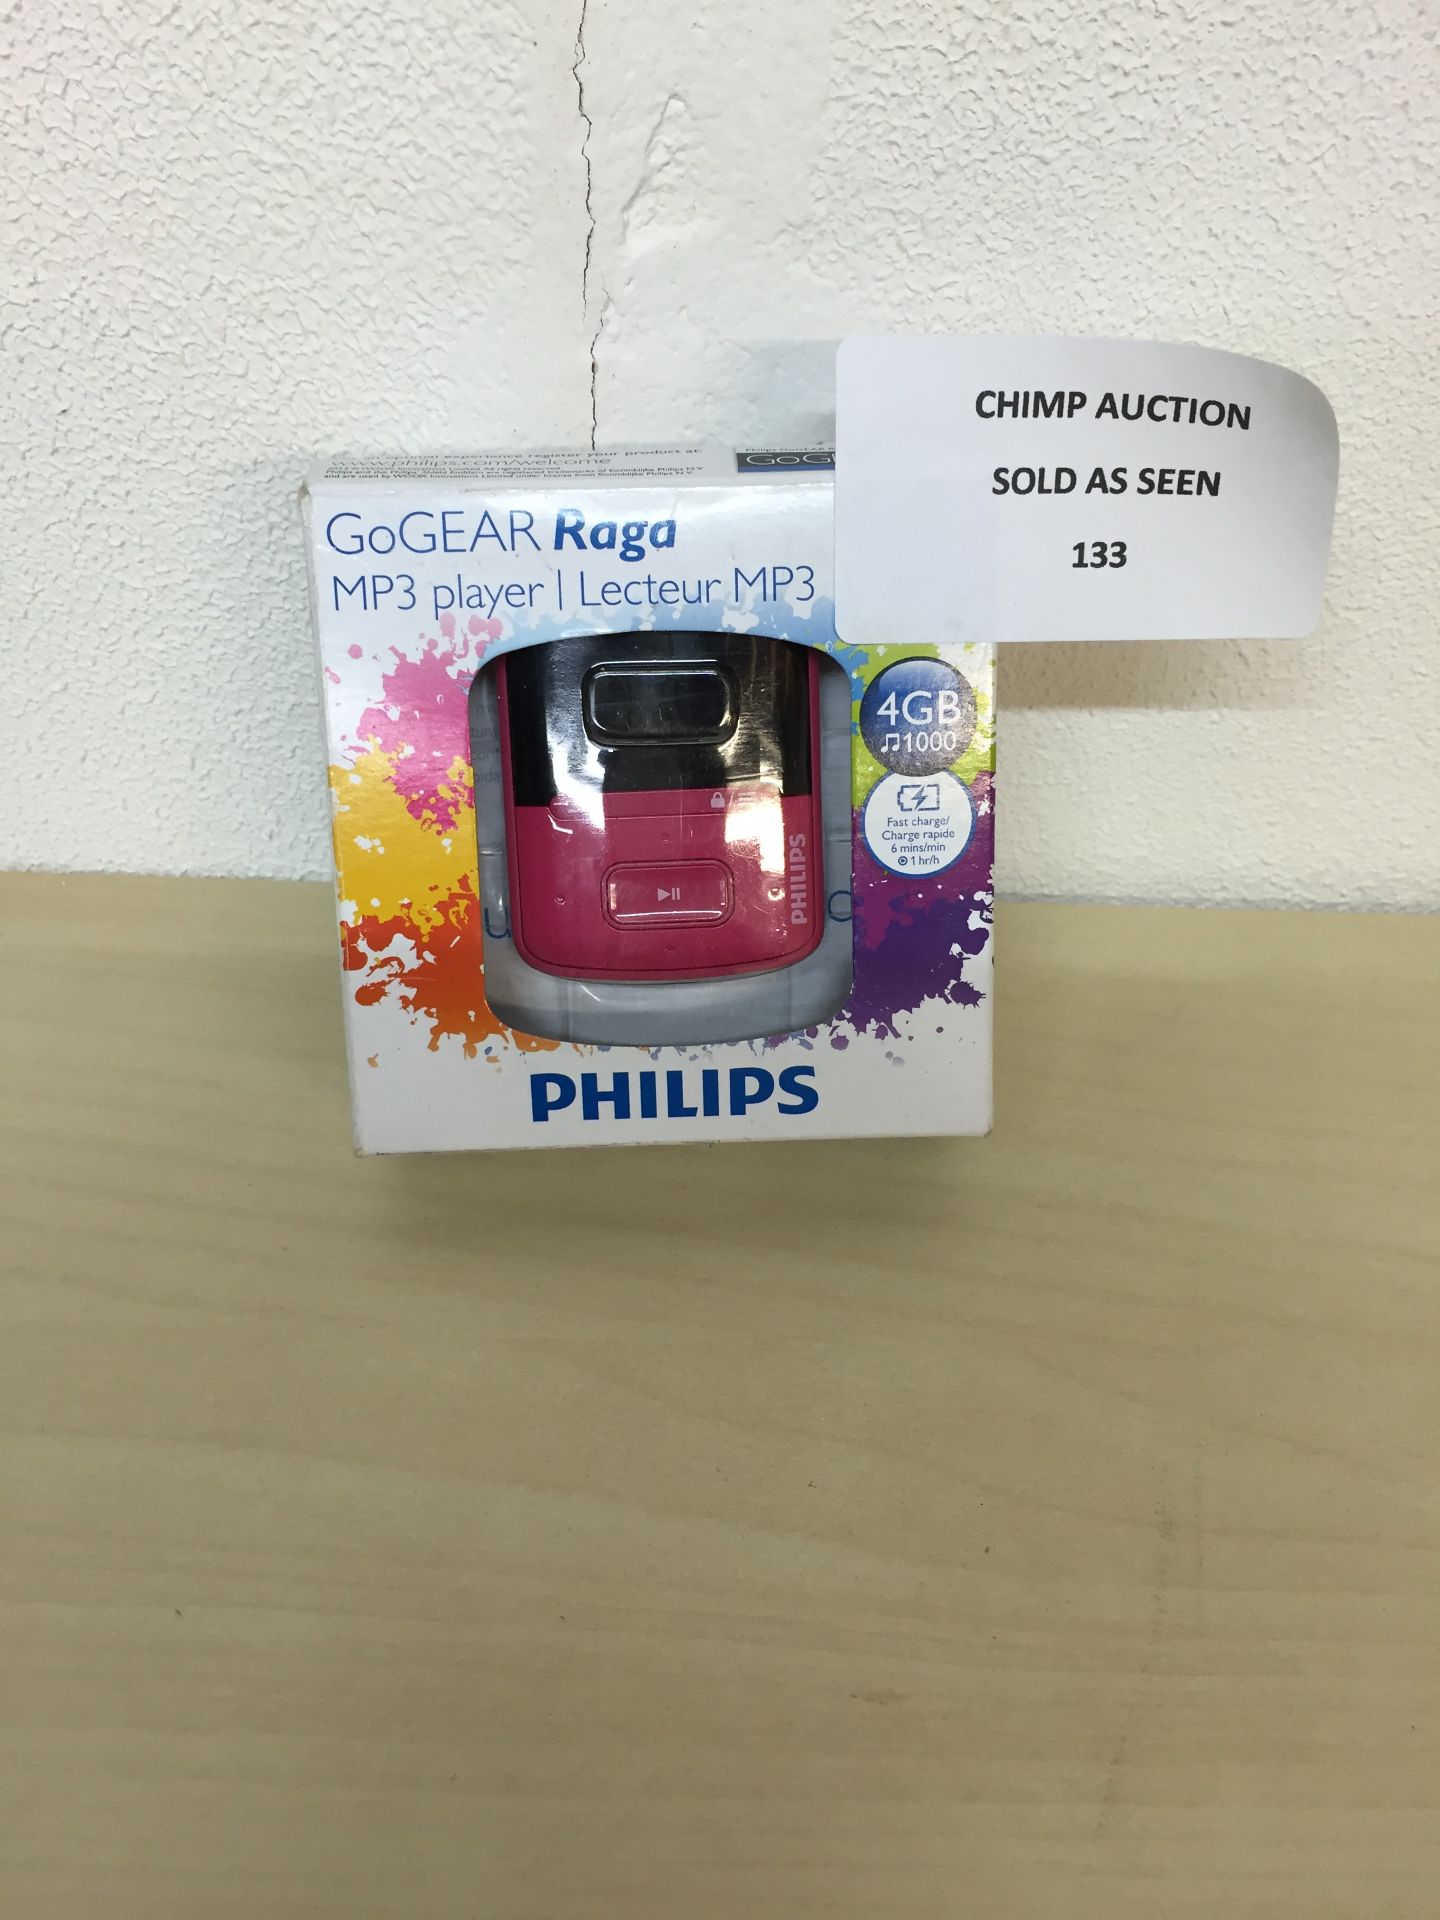 BOXED BRAND NEW PHILIPS 4GB MP3 PLAYER RRP £29.99